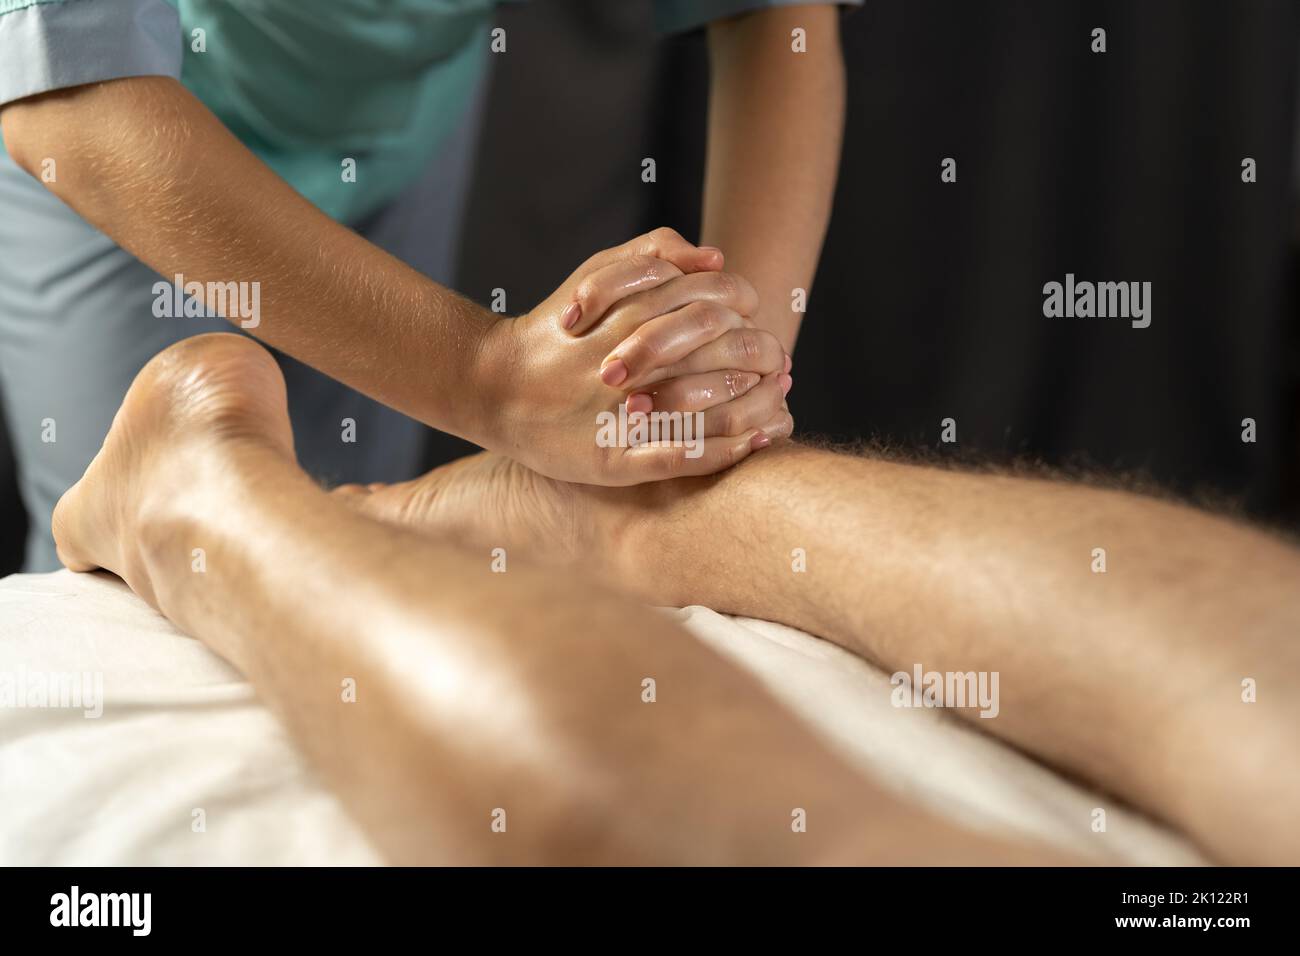 Sports massage concept. Female massage therapist working with a patient, massaging his calves. Stock Photo